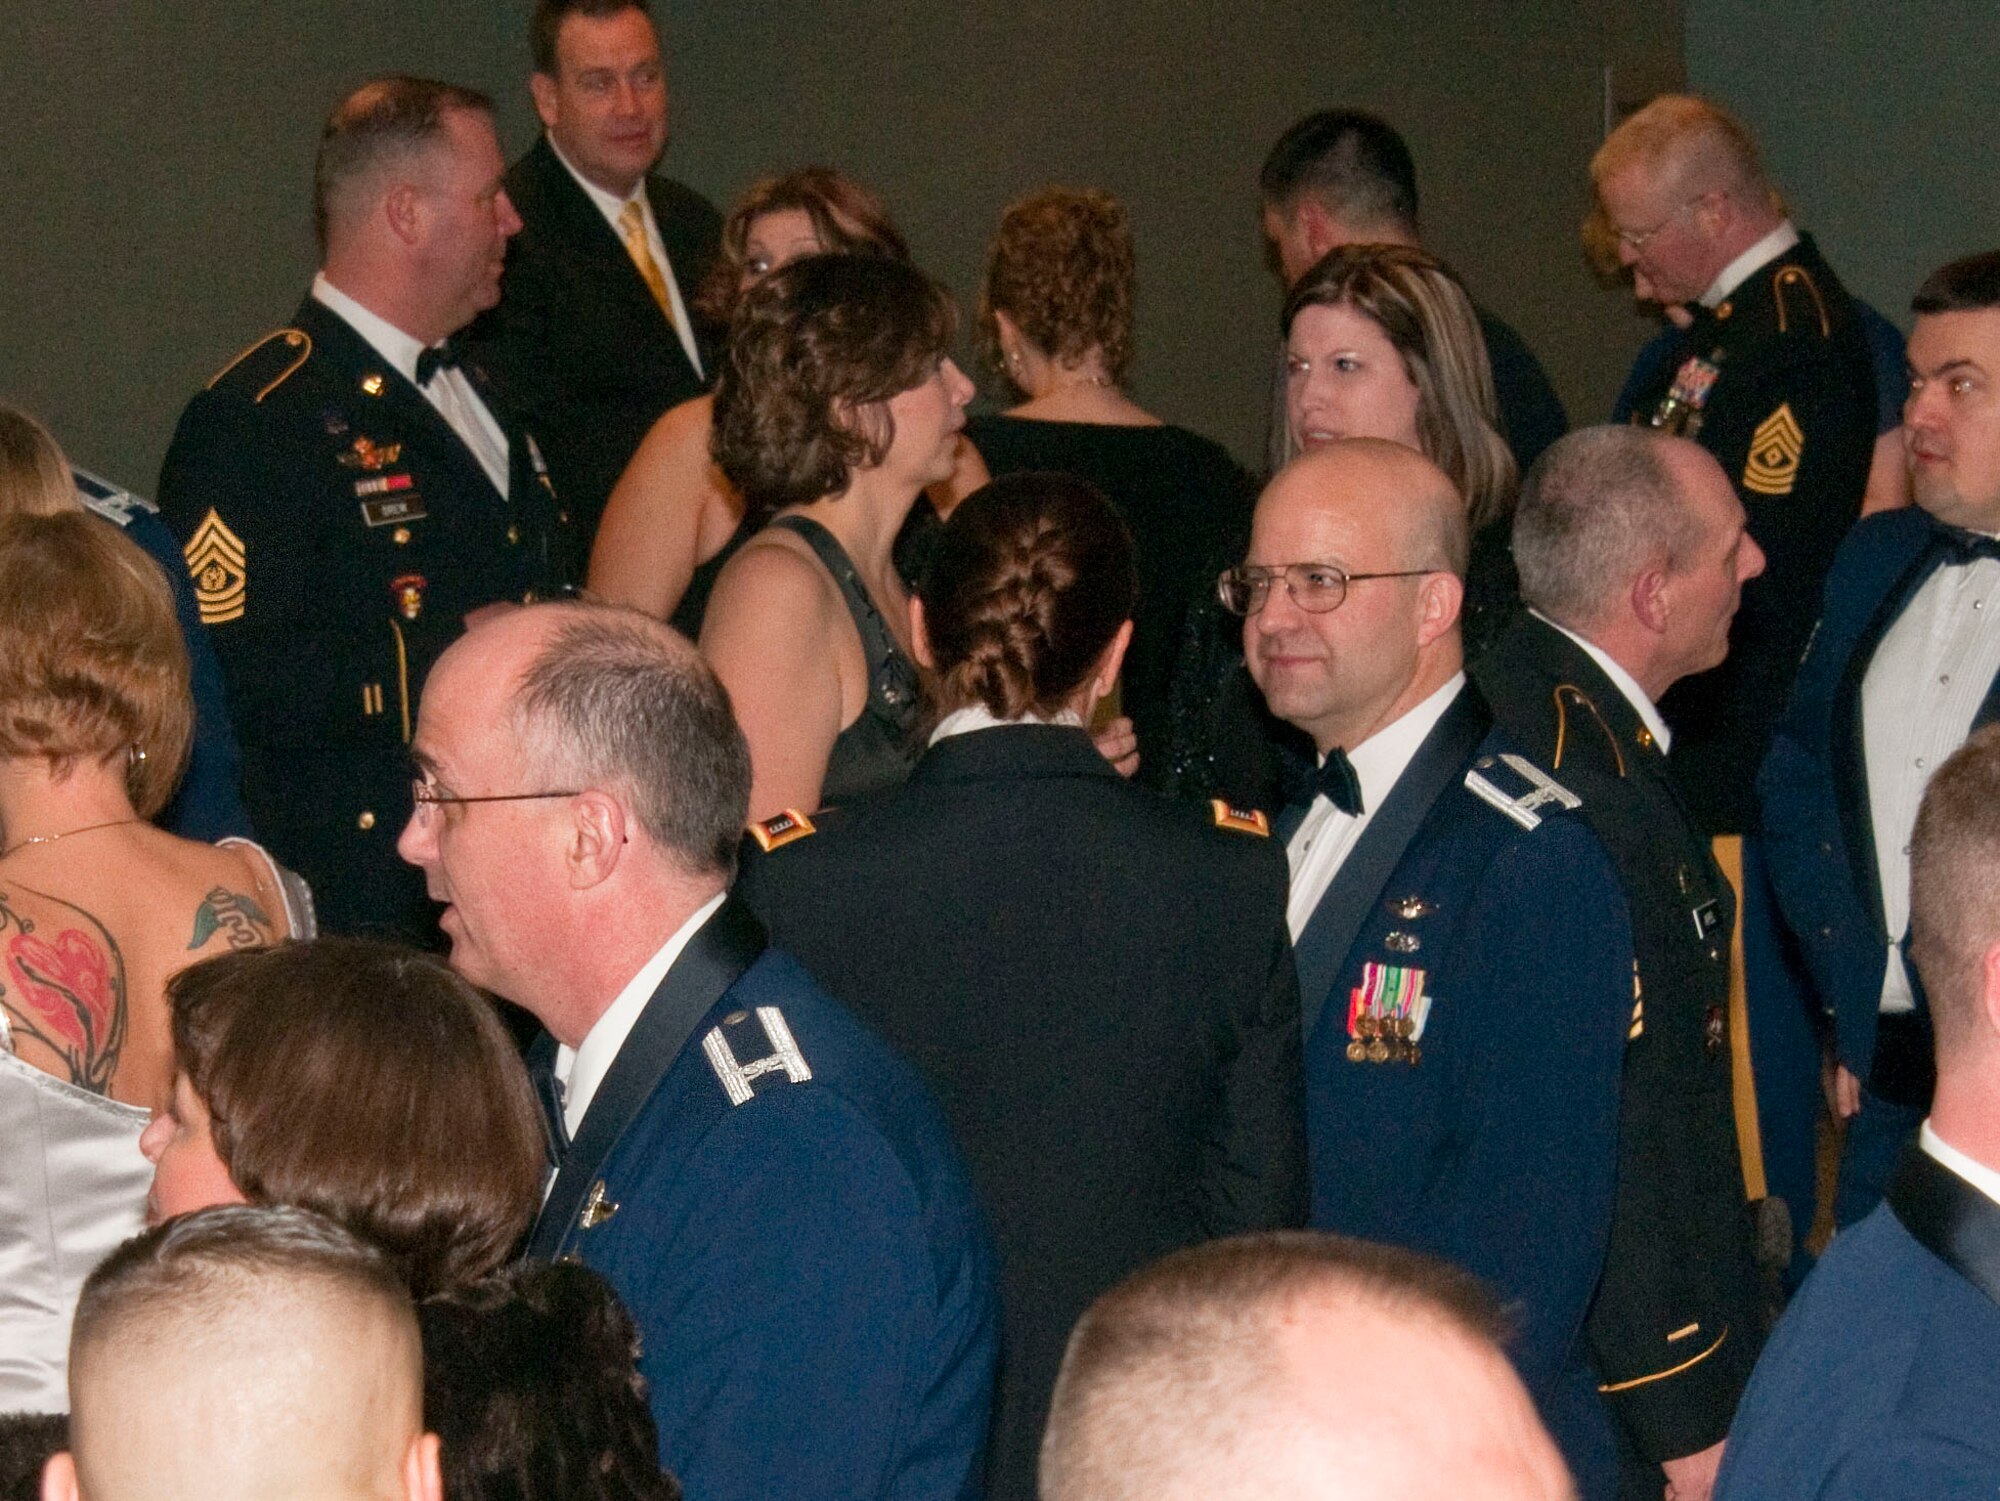 ANCHORAGE, Alaska -- Army and Air Gaurdsmen mingle March 23 at the Joint National Guard Ball in downtown Anchorage. Alaska Guardsmen celebrated the National Guard's 375th birthday at the Dena'ina Civic and Convention Center. National Guard Photo by Staff Sgt. N. Alicia Goldberger.